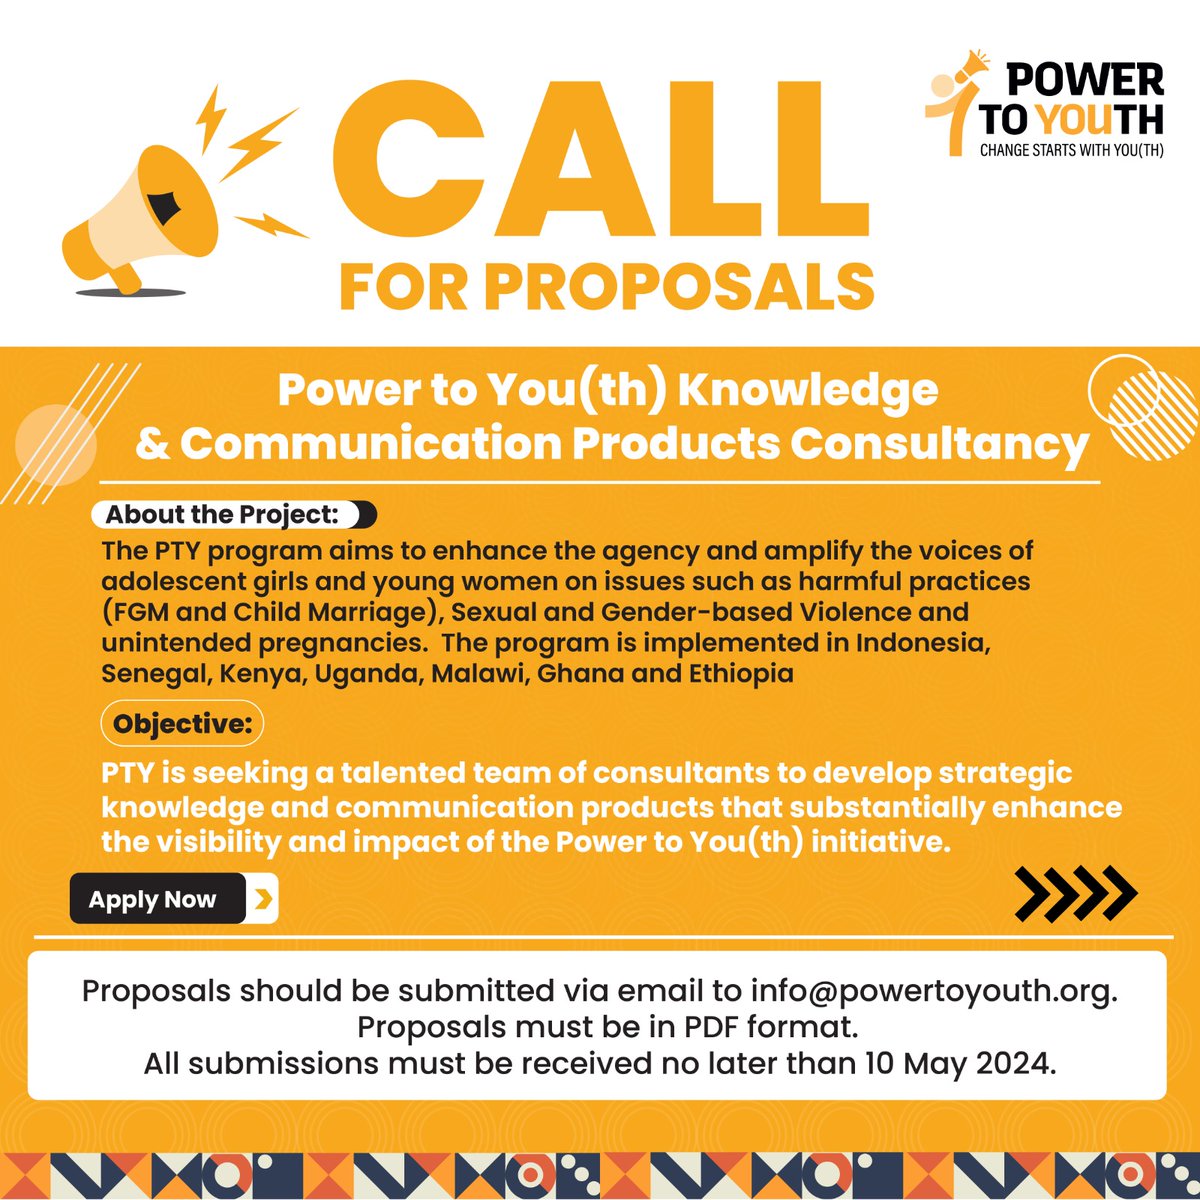 #PowerToYouth is 📣 #Hiring . Thrilled to announce a new call for proposals seeking expertise to increase the visibility and impact of our Power To Youth (PtY) program.Application deadline is 10th May 2024 For more information visit Pty website at: powertoyouth.com/opportunities/…